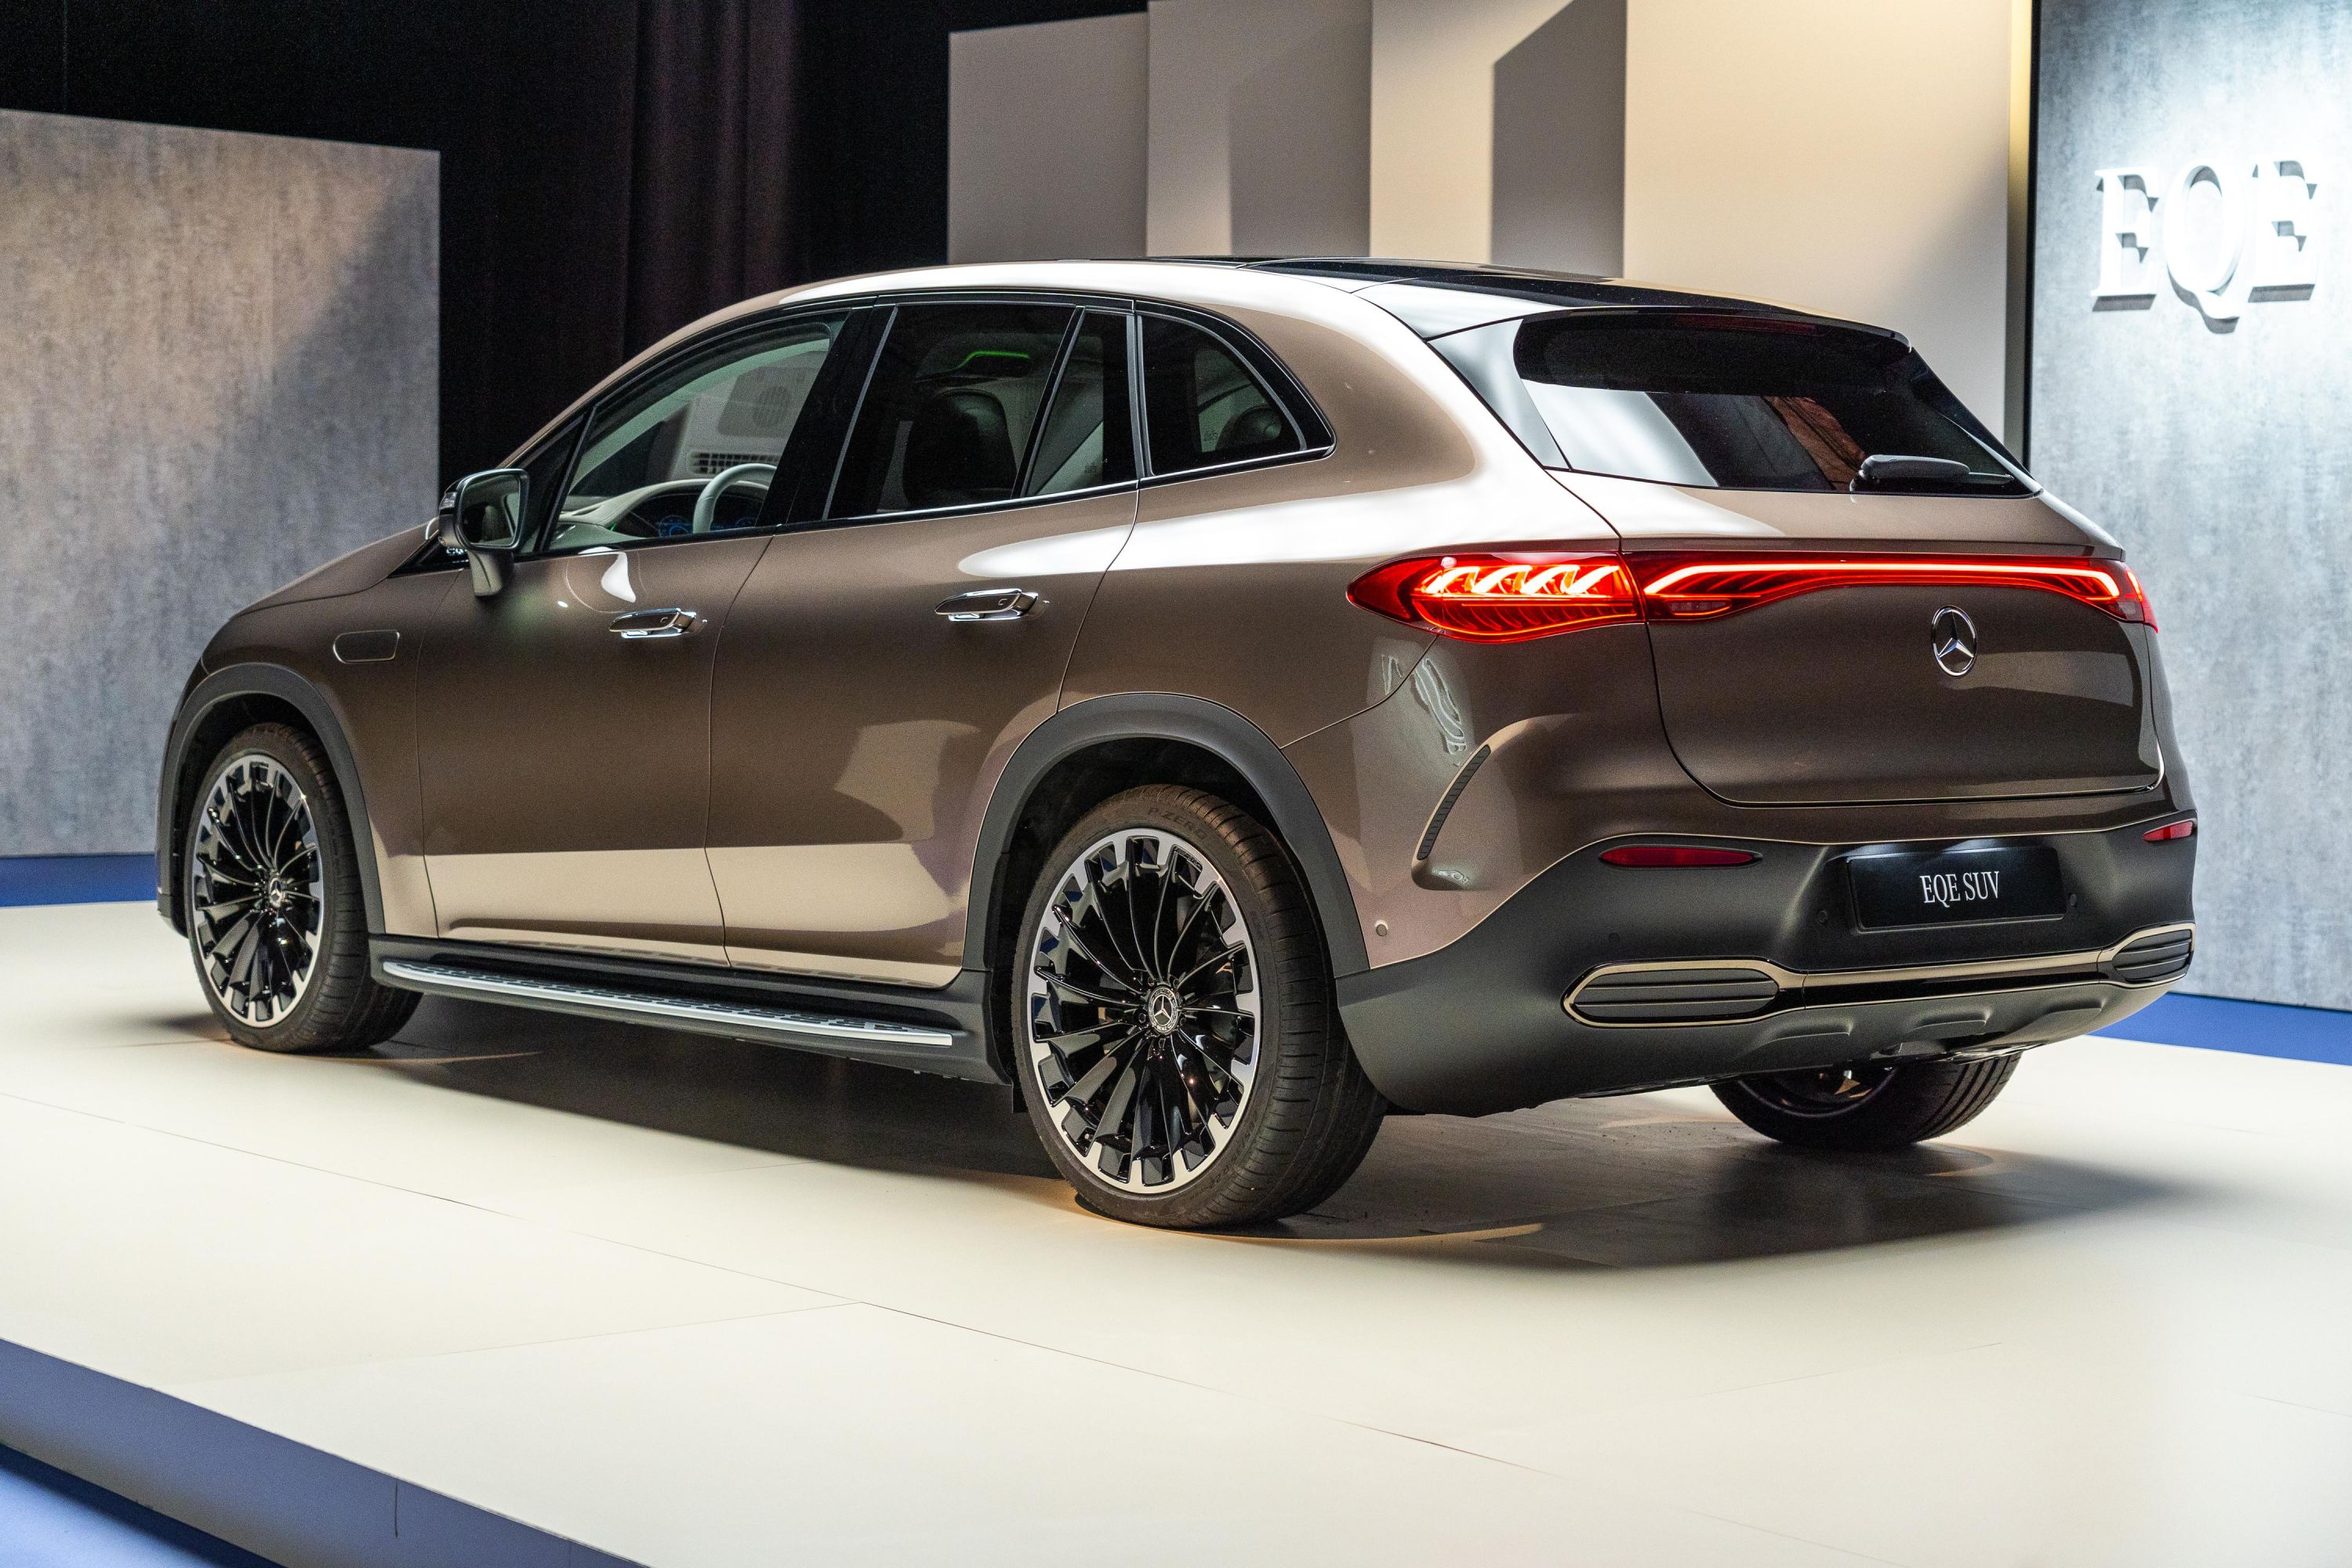 Mercedes-Benz confirms the time to launch the EQE SUV in Australia - News7g